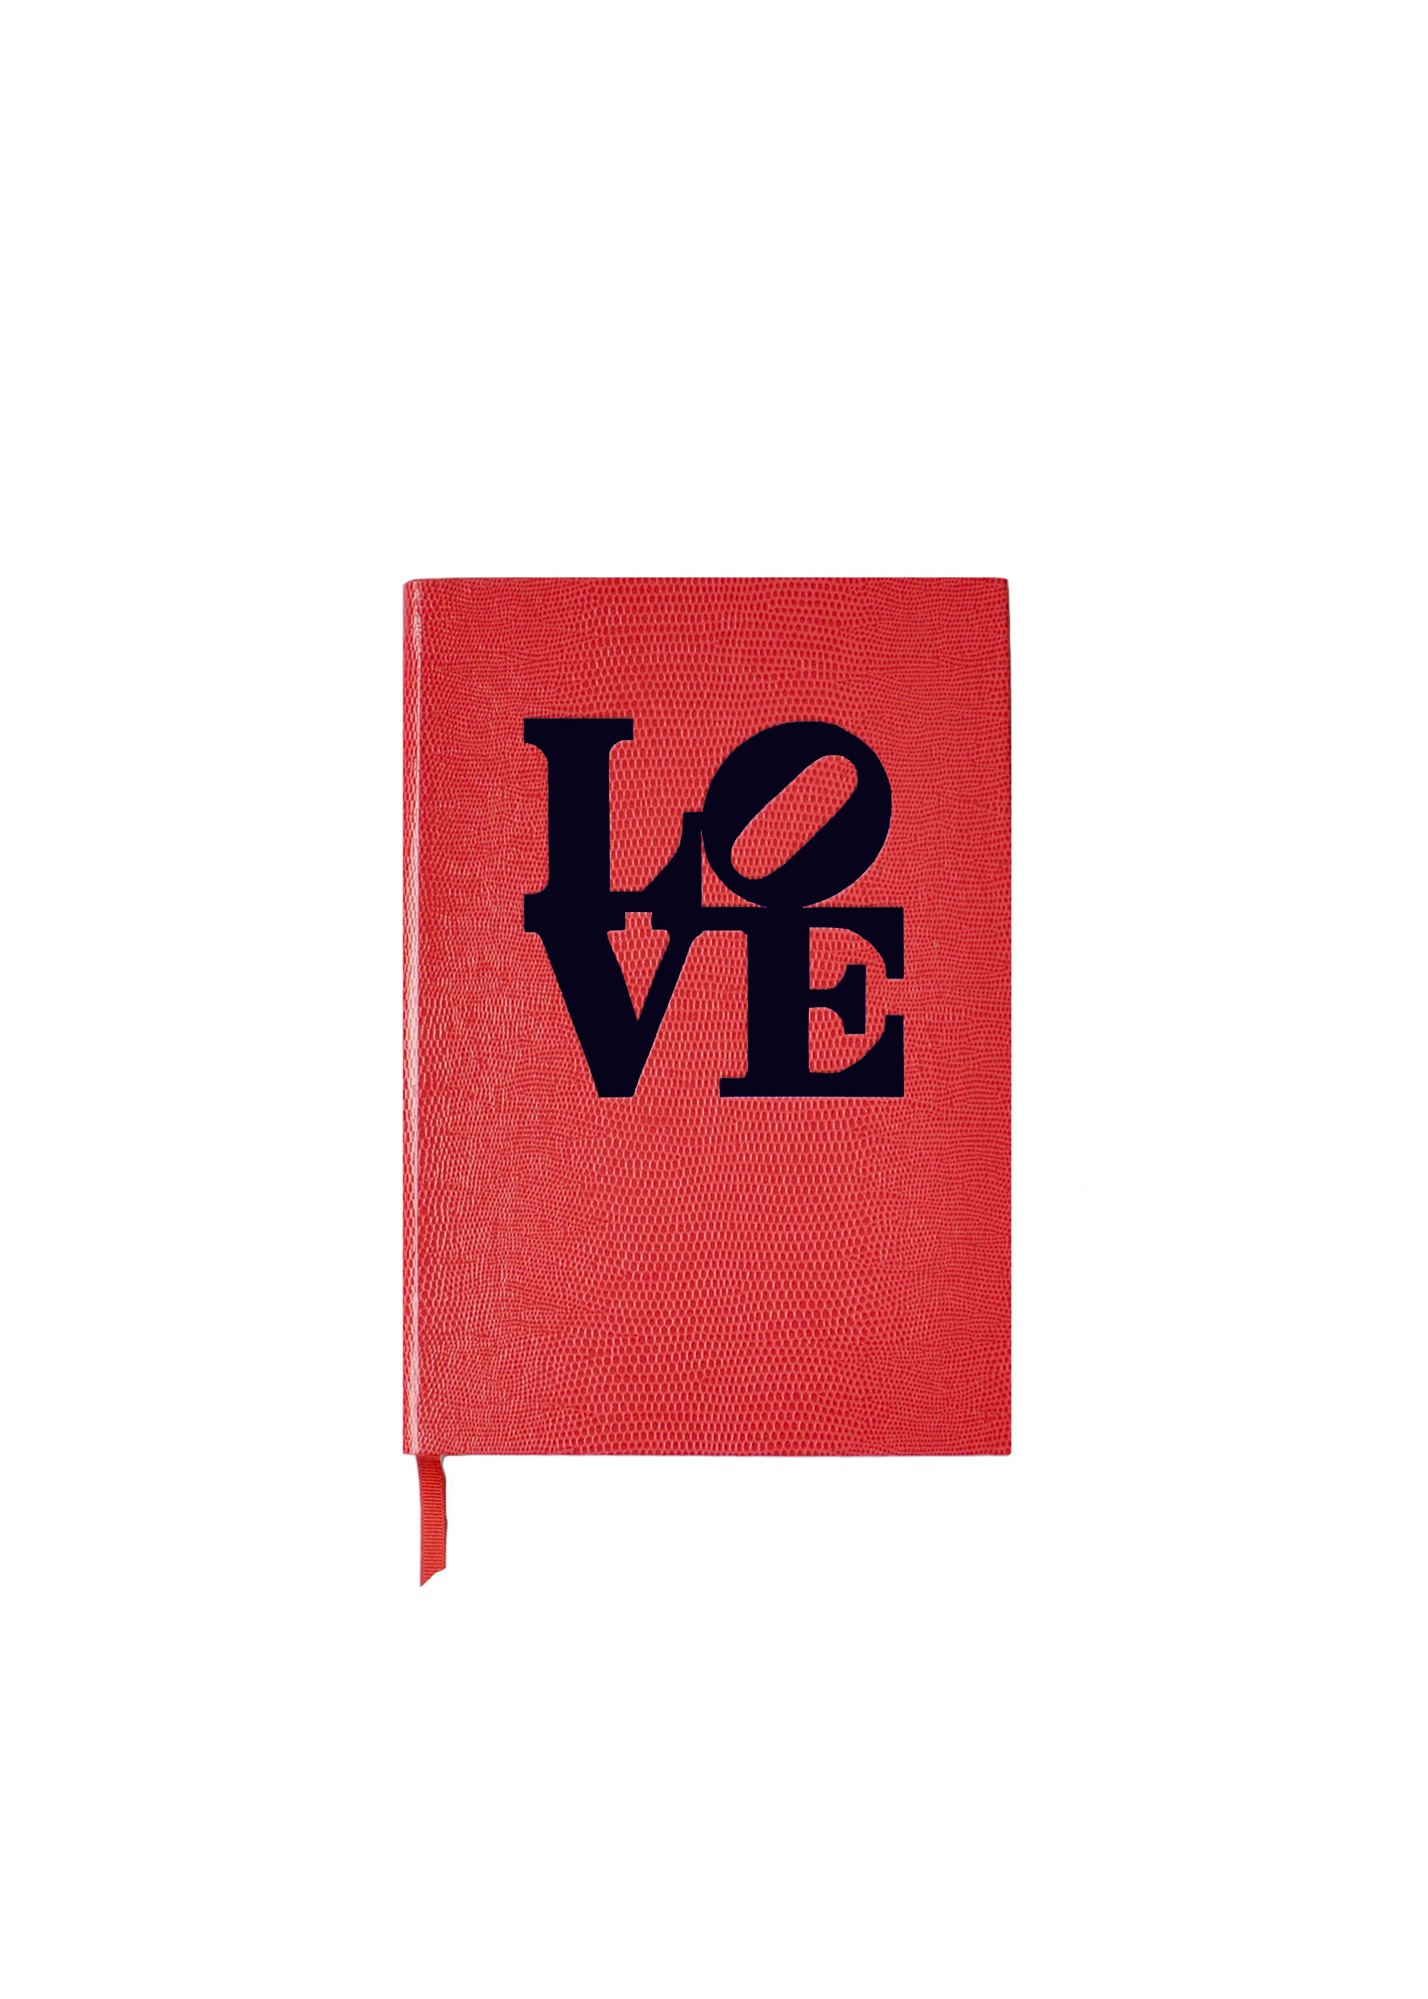 NOTEBOOK NO°126 - LOVE BY ROBERT INDIANA